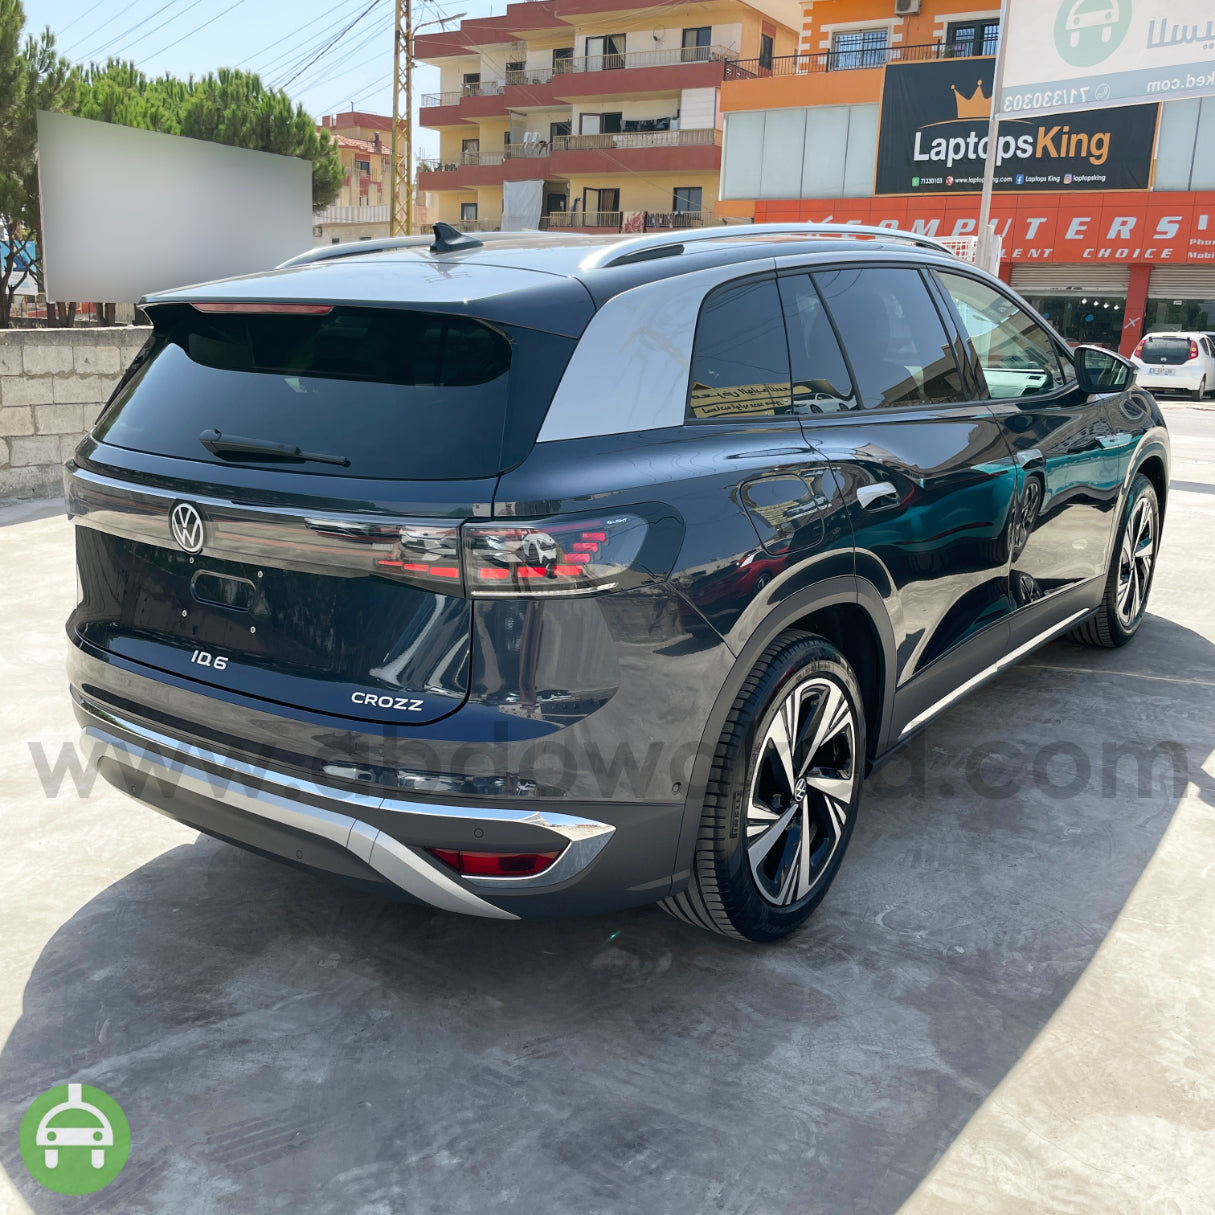 VW ID6 Crozz Pro VIP Edition 2022 6-Seater Dark Blue Color 601km Range/Charge Fully Electric Car (New - 0KM)